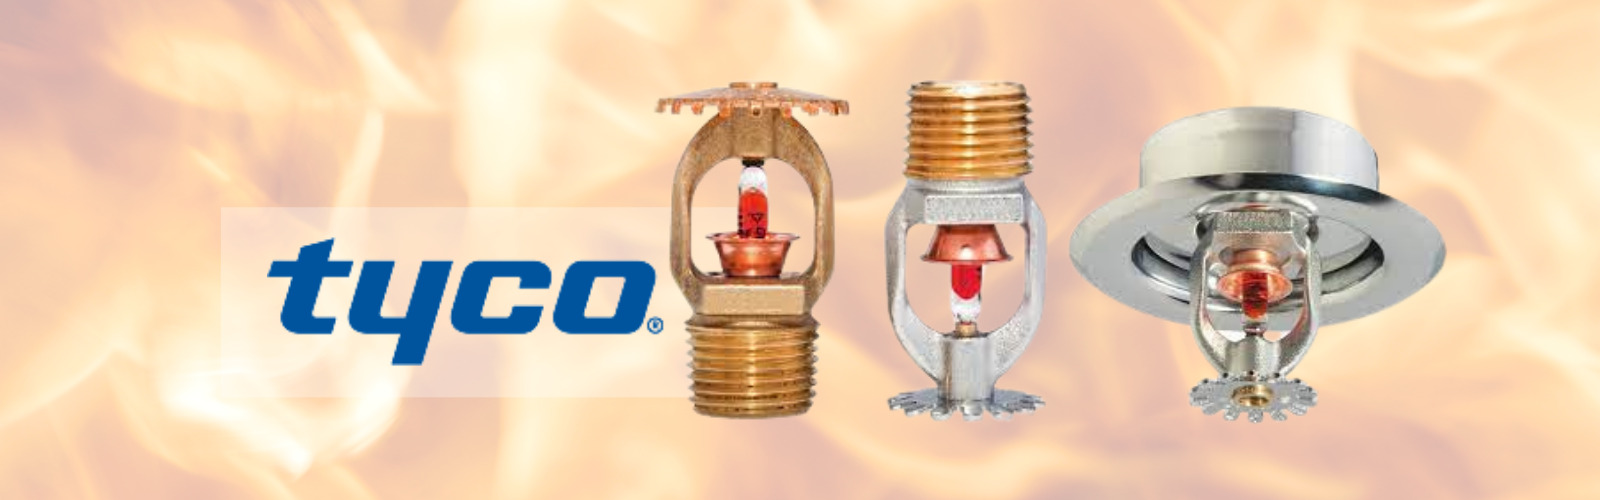 Tyco Fire Sprinkler Heads and Components